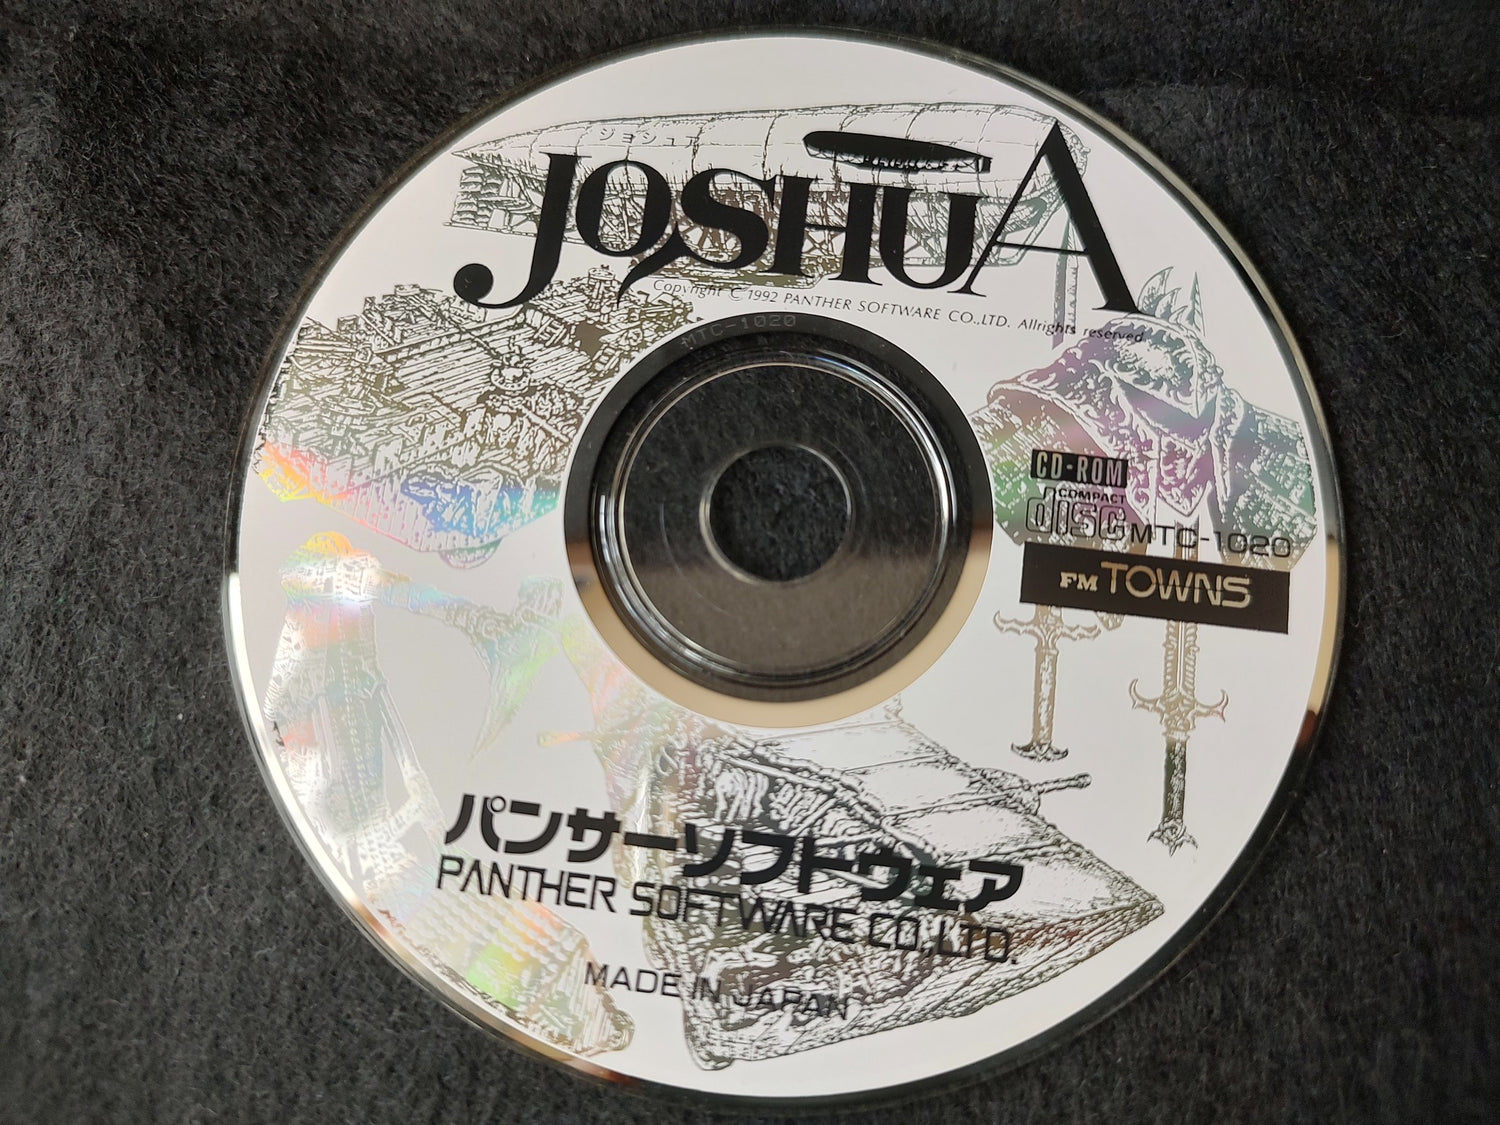 JOSHUA FM TOWNS Marty Game, Disk, w/Manual and Box set, Working 